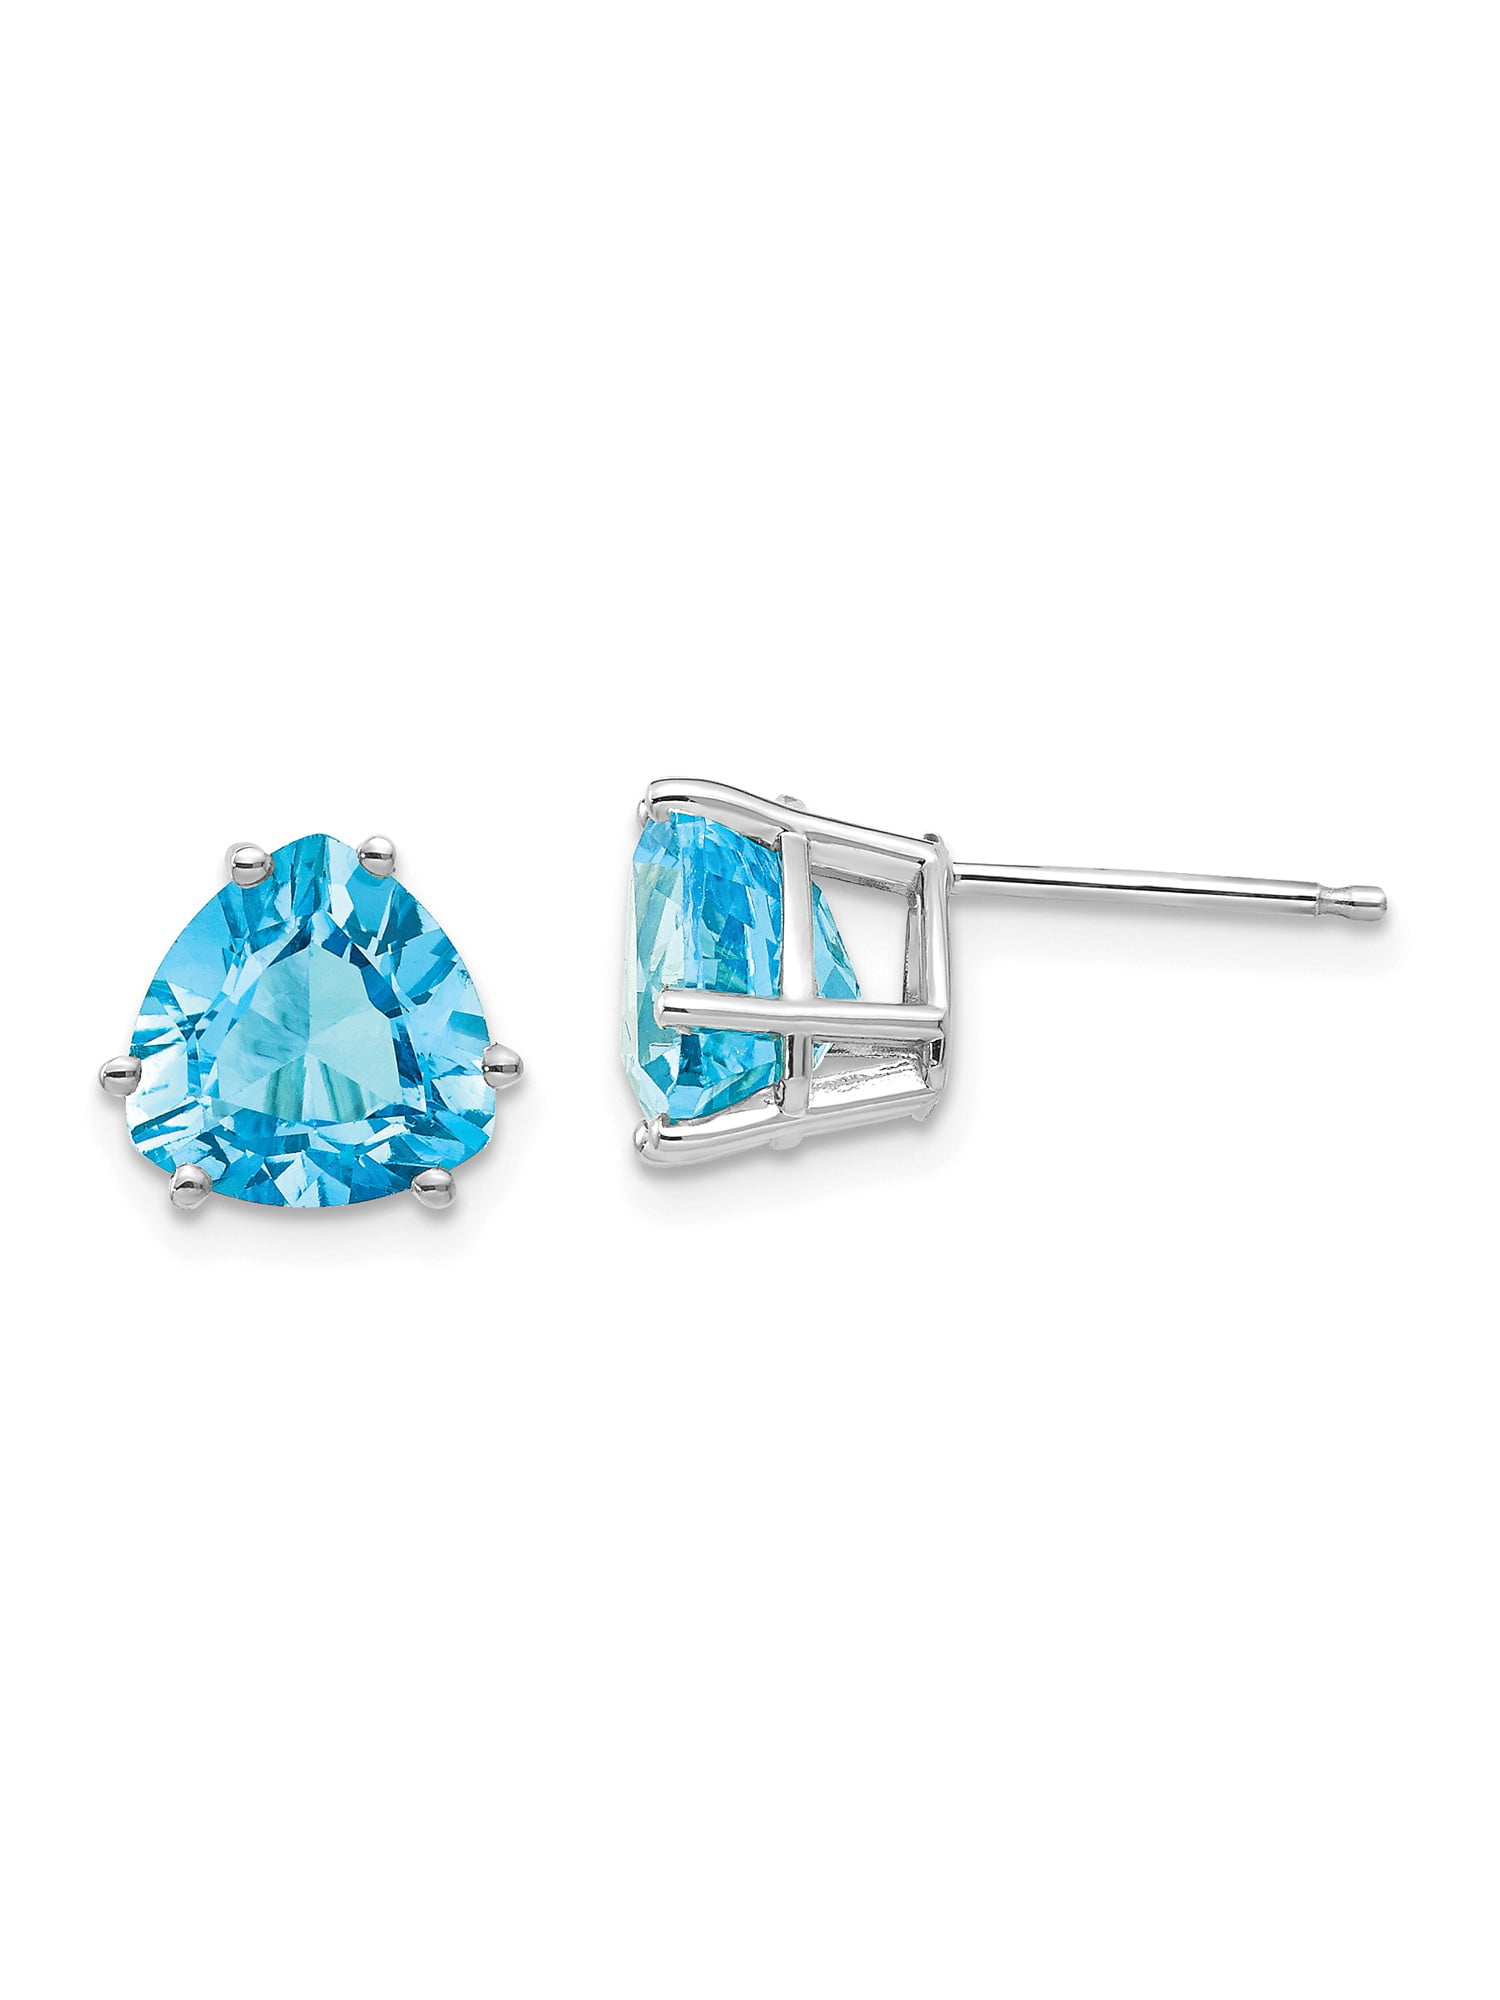 Jewels By Lux Set 14k White Gold Genuine London Blue Topaz 5 mm Friction Pair Polished London Blue Topaz Earrings With Backs